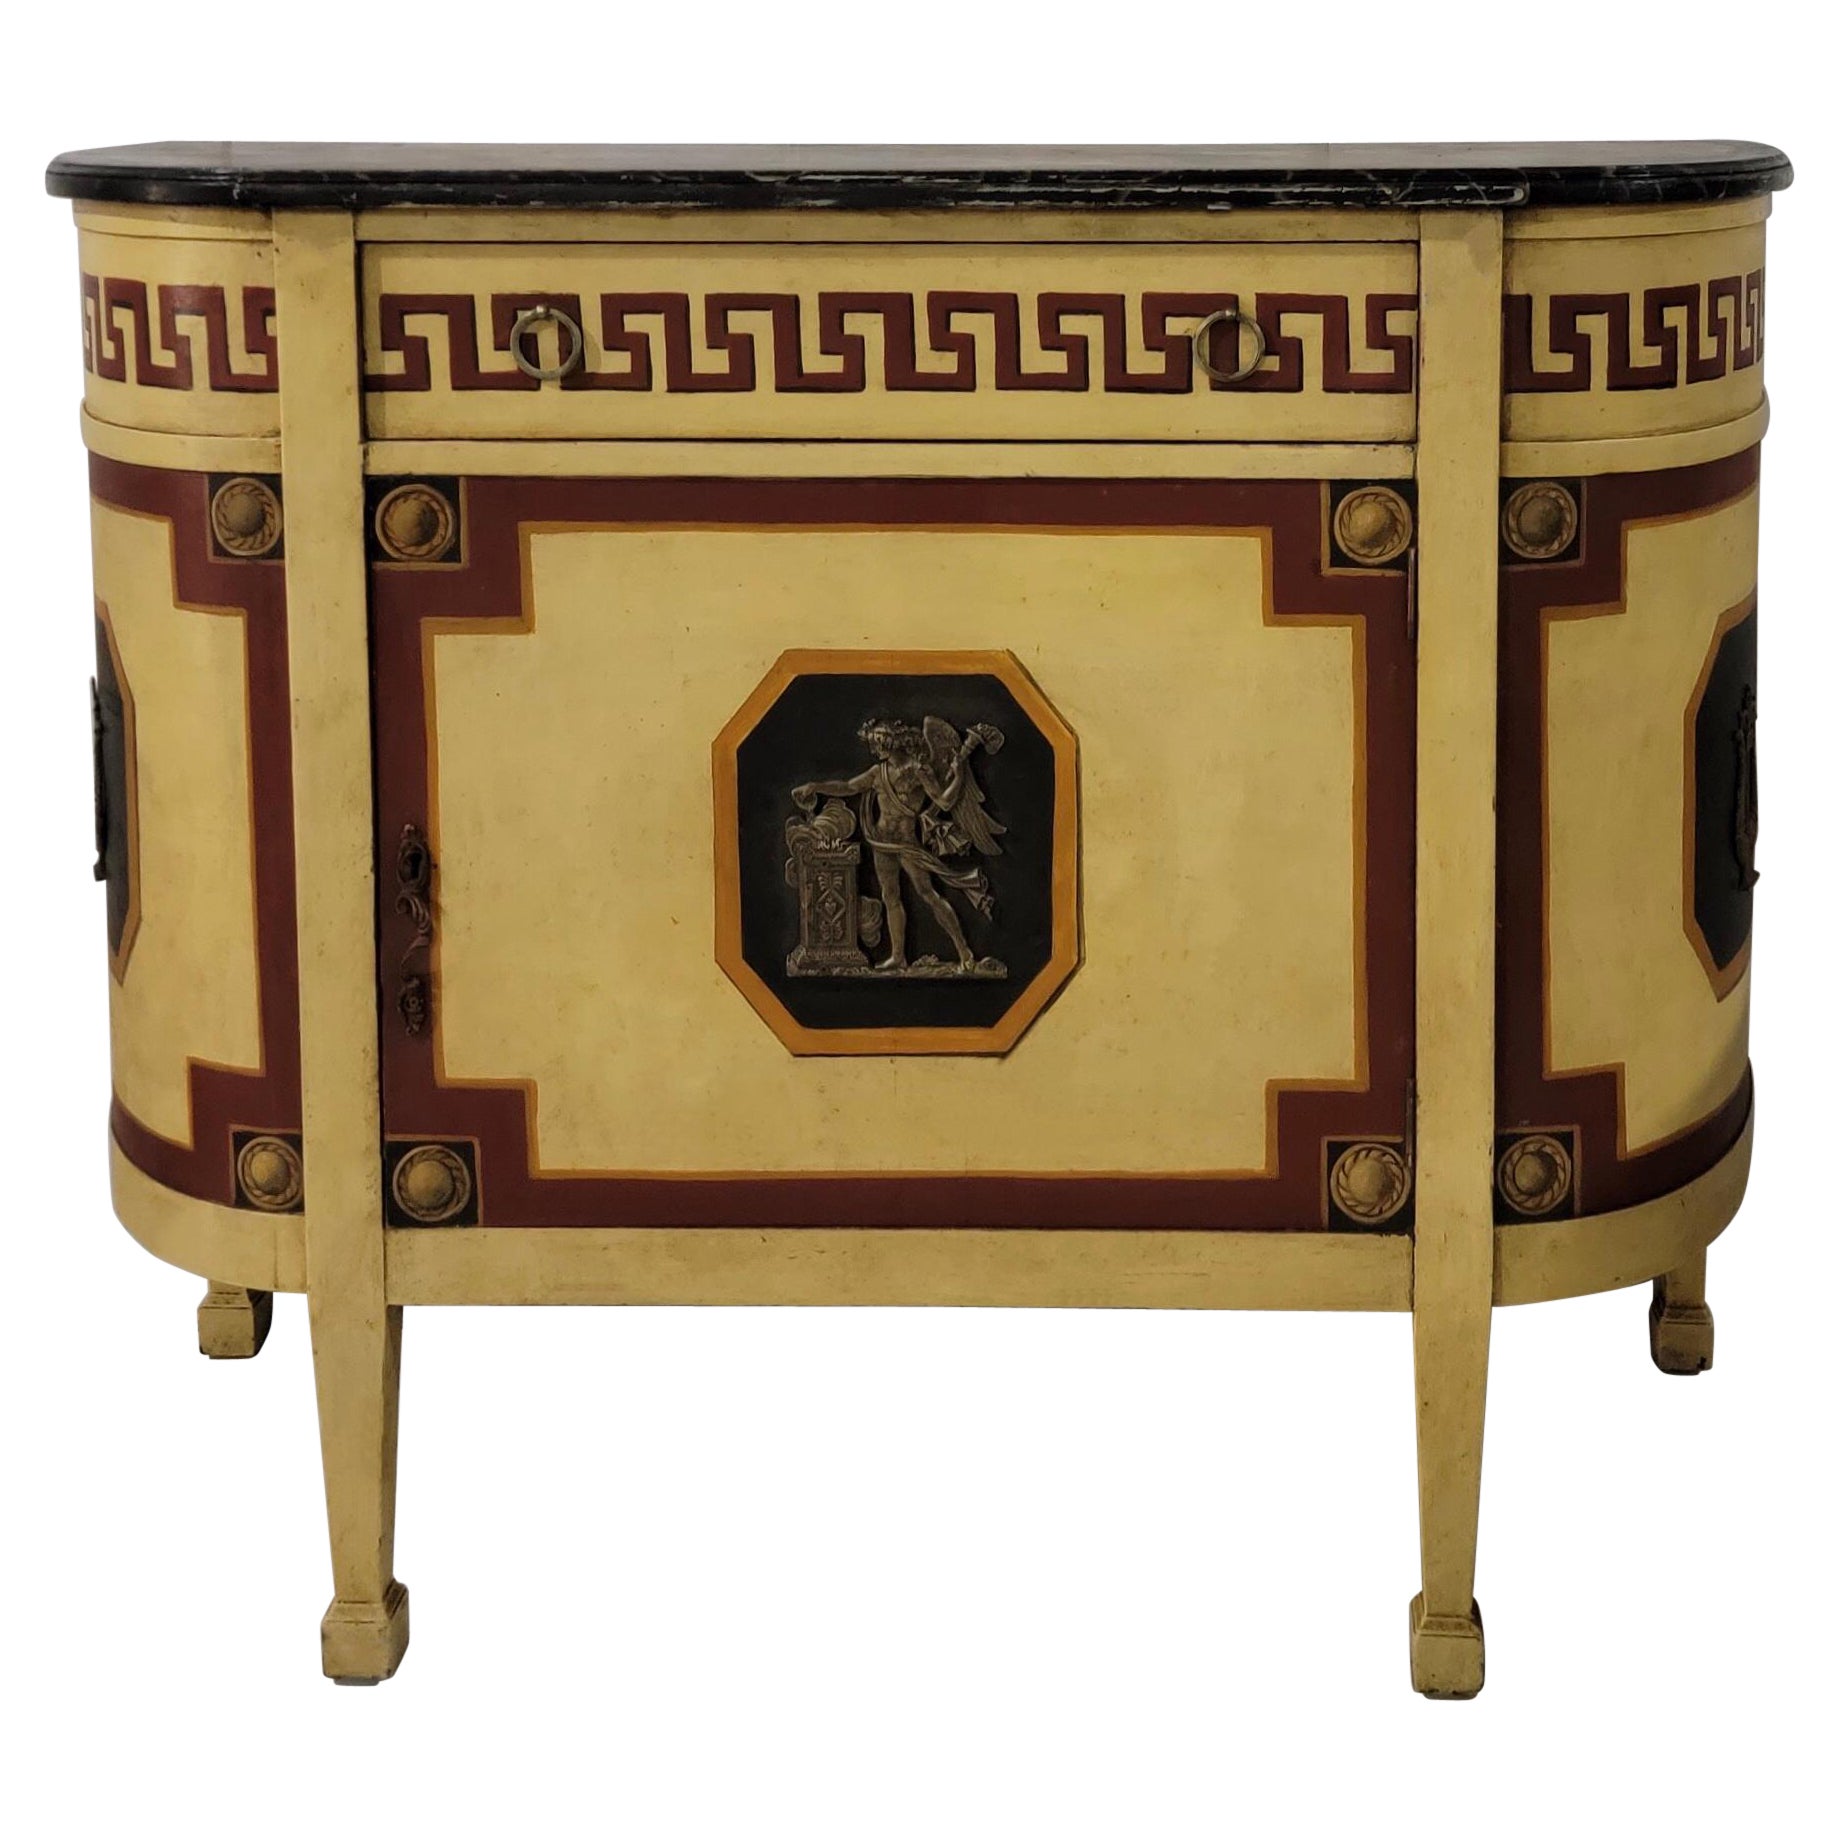 Early 20th-C. Italian Neo-Classical Style Faux Marble Painted Demilune Cabinet For Sale